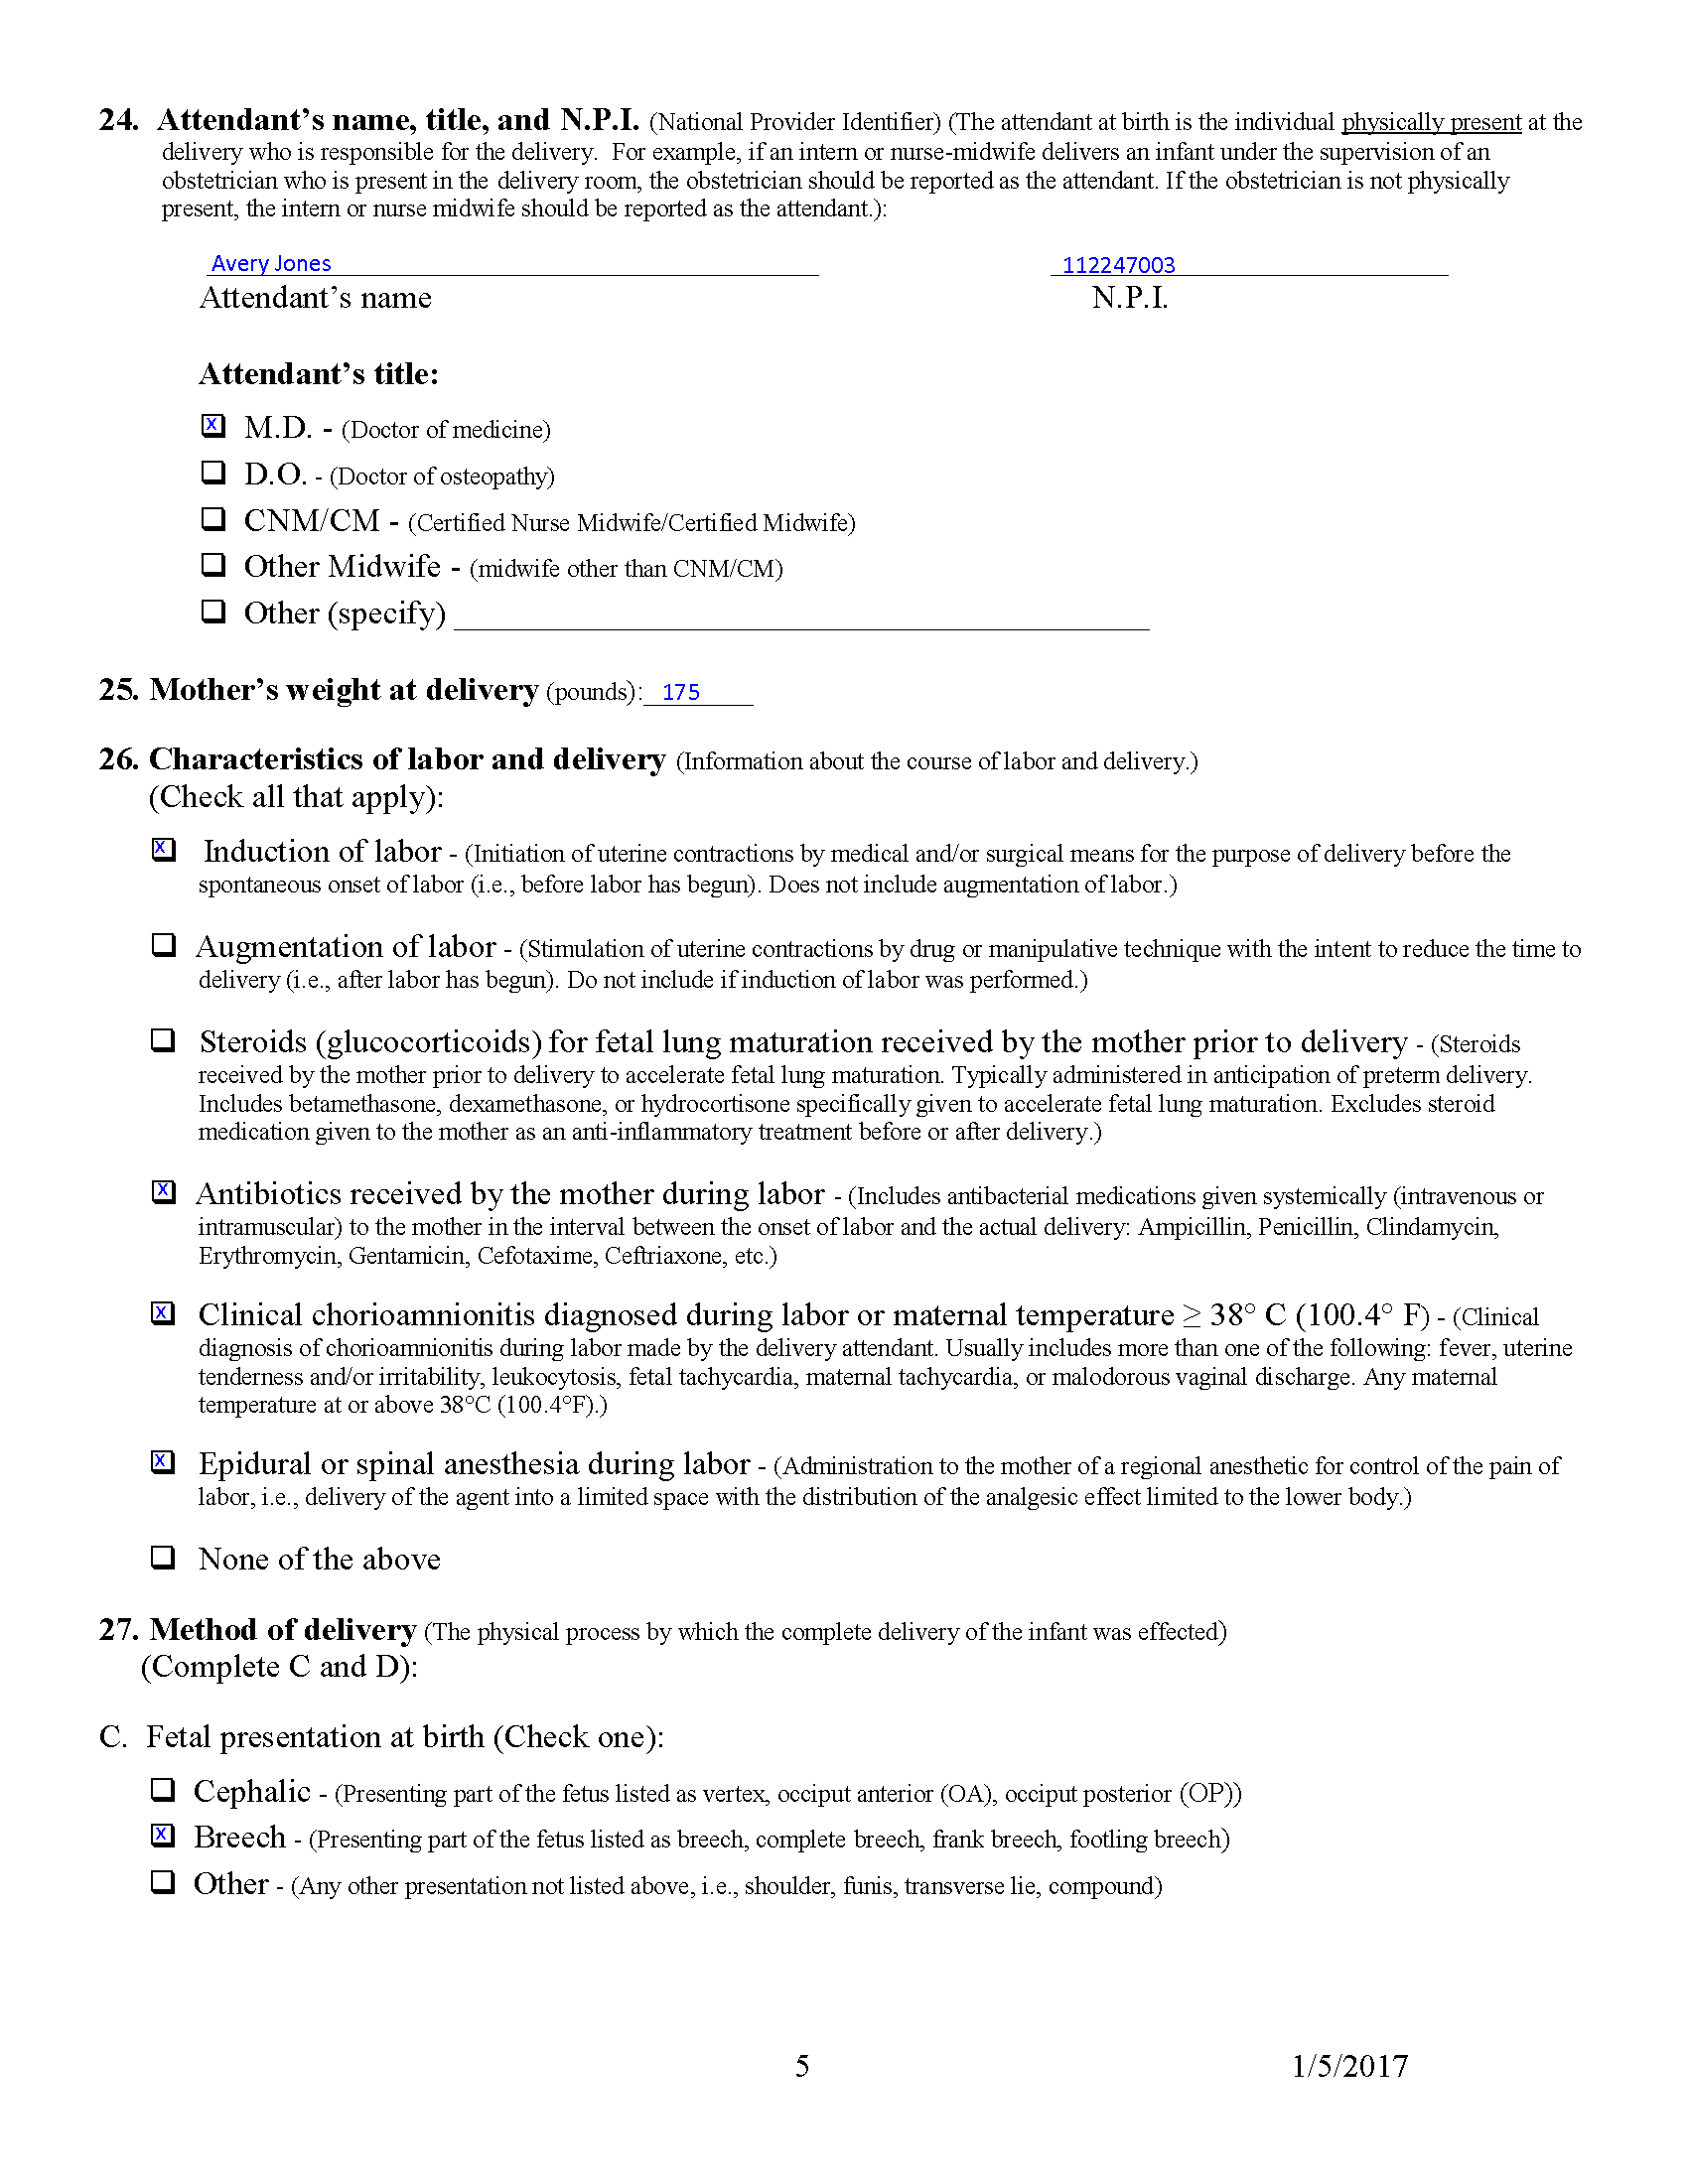 Example Facility Worksheet for Live Birth Certificate for Baby G Quinn - p5